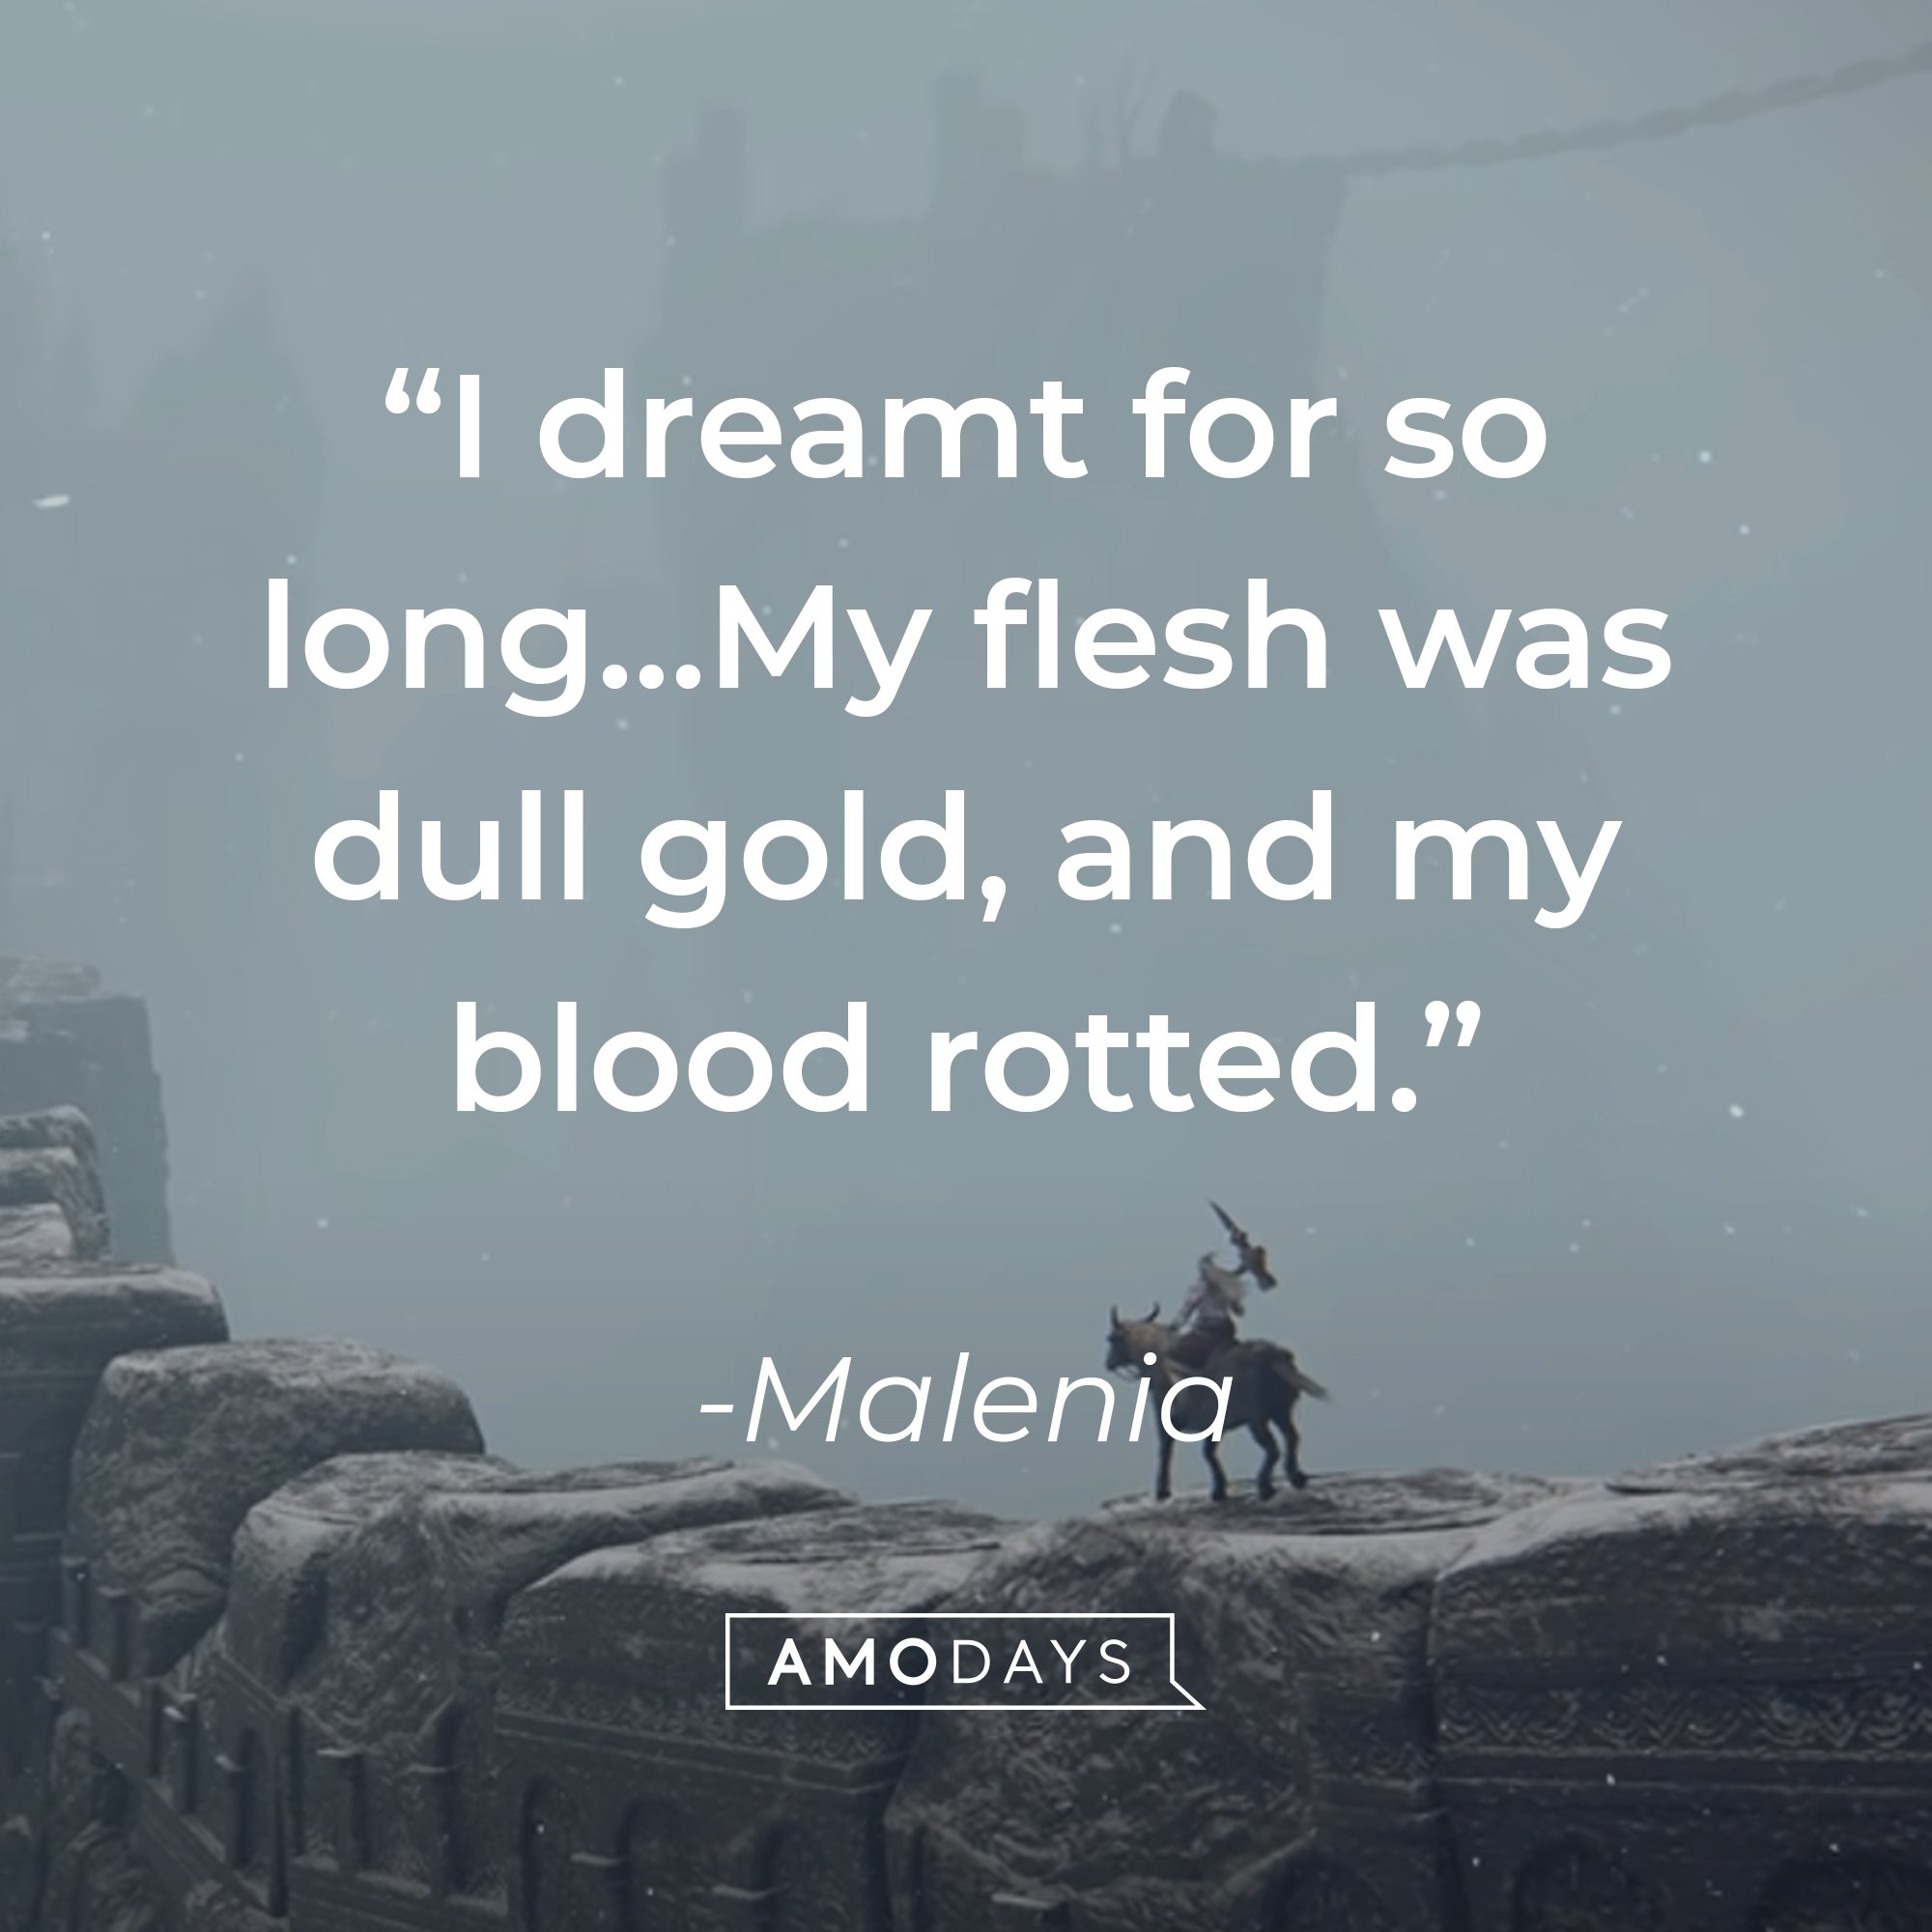 Malenia’s quote: "I dreamt for so long…My flesh was dull gold, and my blood rotted." | Image: AmoDays